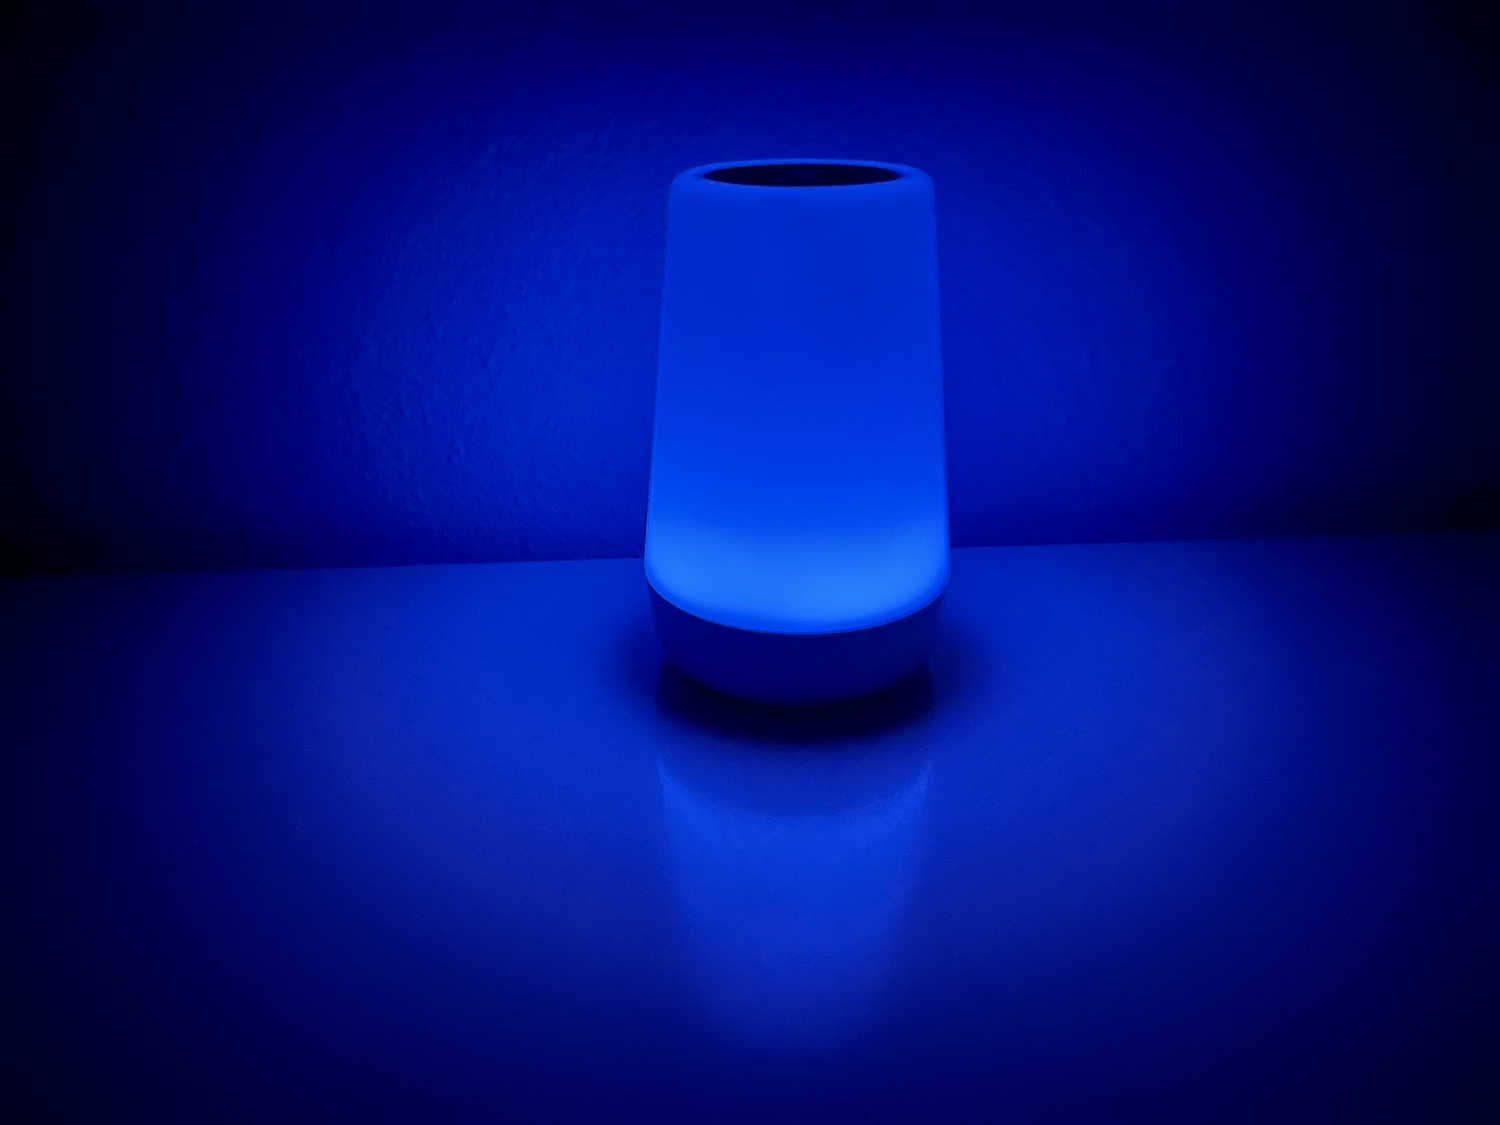 Closeup of a white noise sound machine with a blue glow on a nightstand